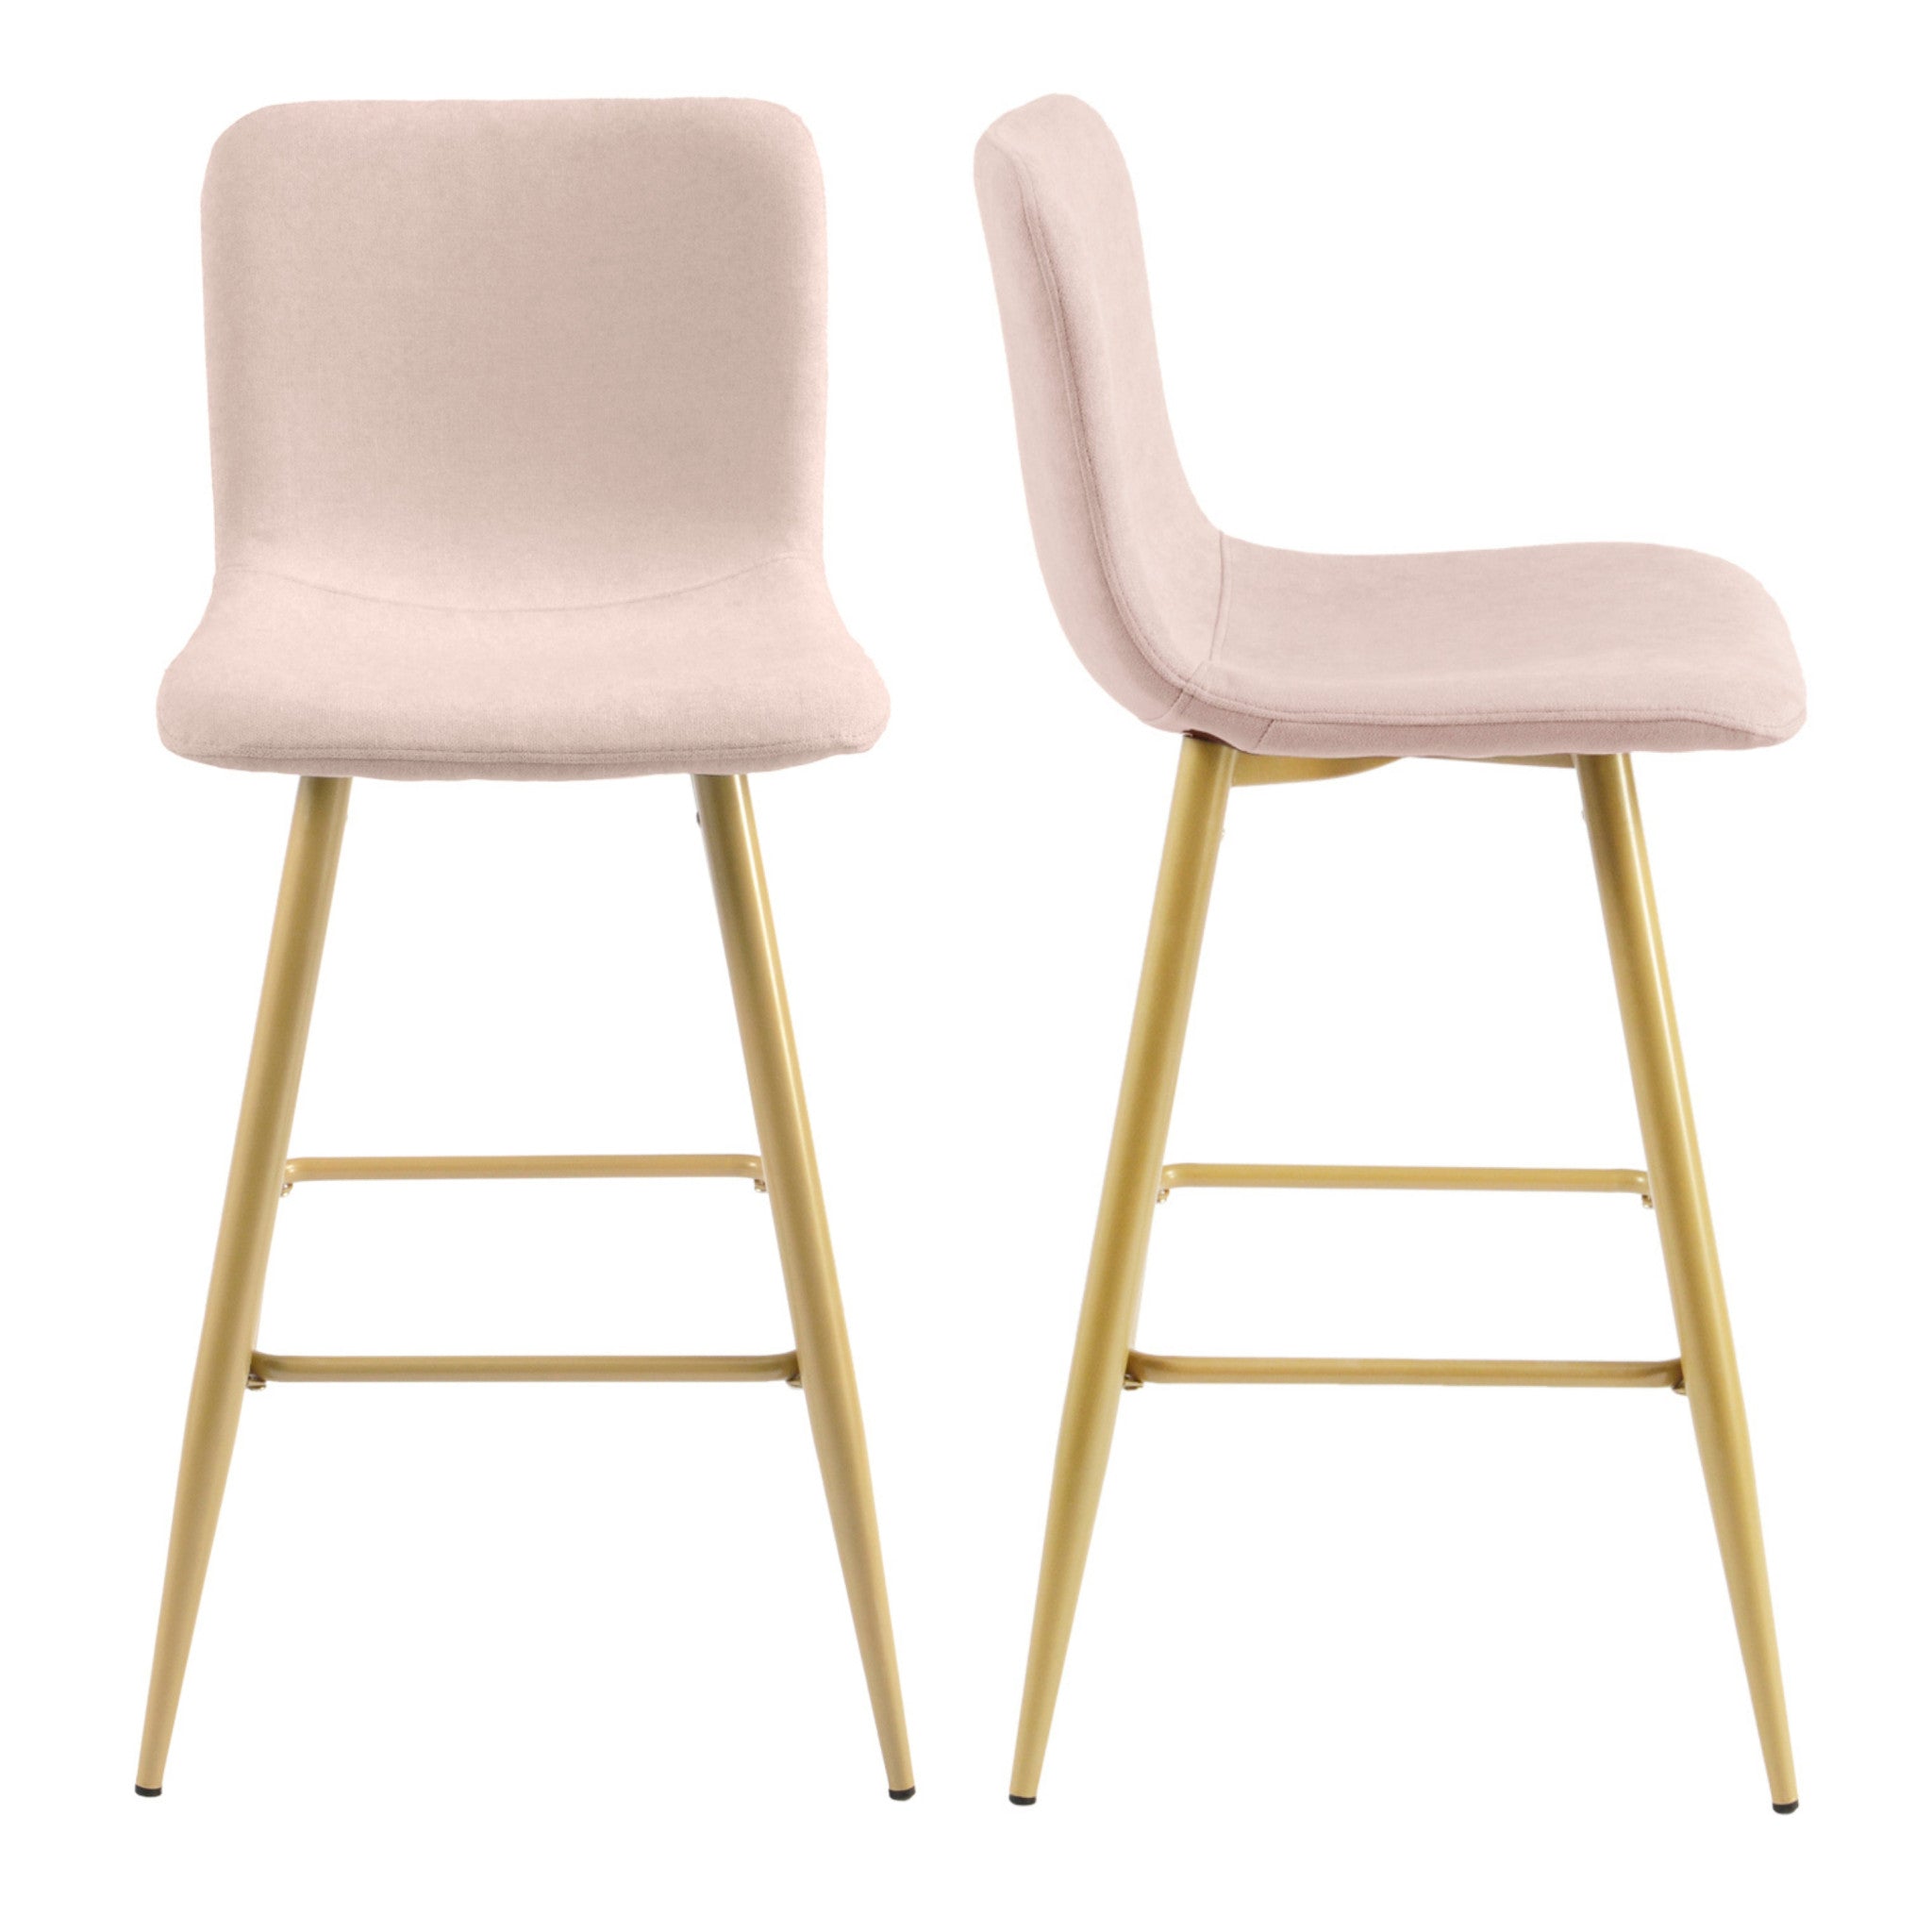 Set of Two 29" Aqua And Gold Steel Bar Height Bar Chairs